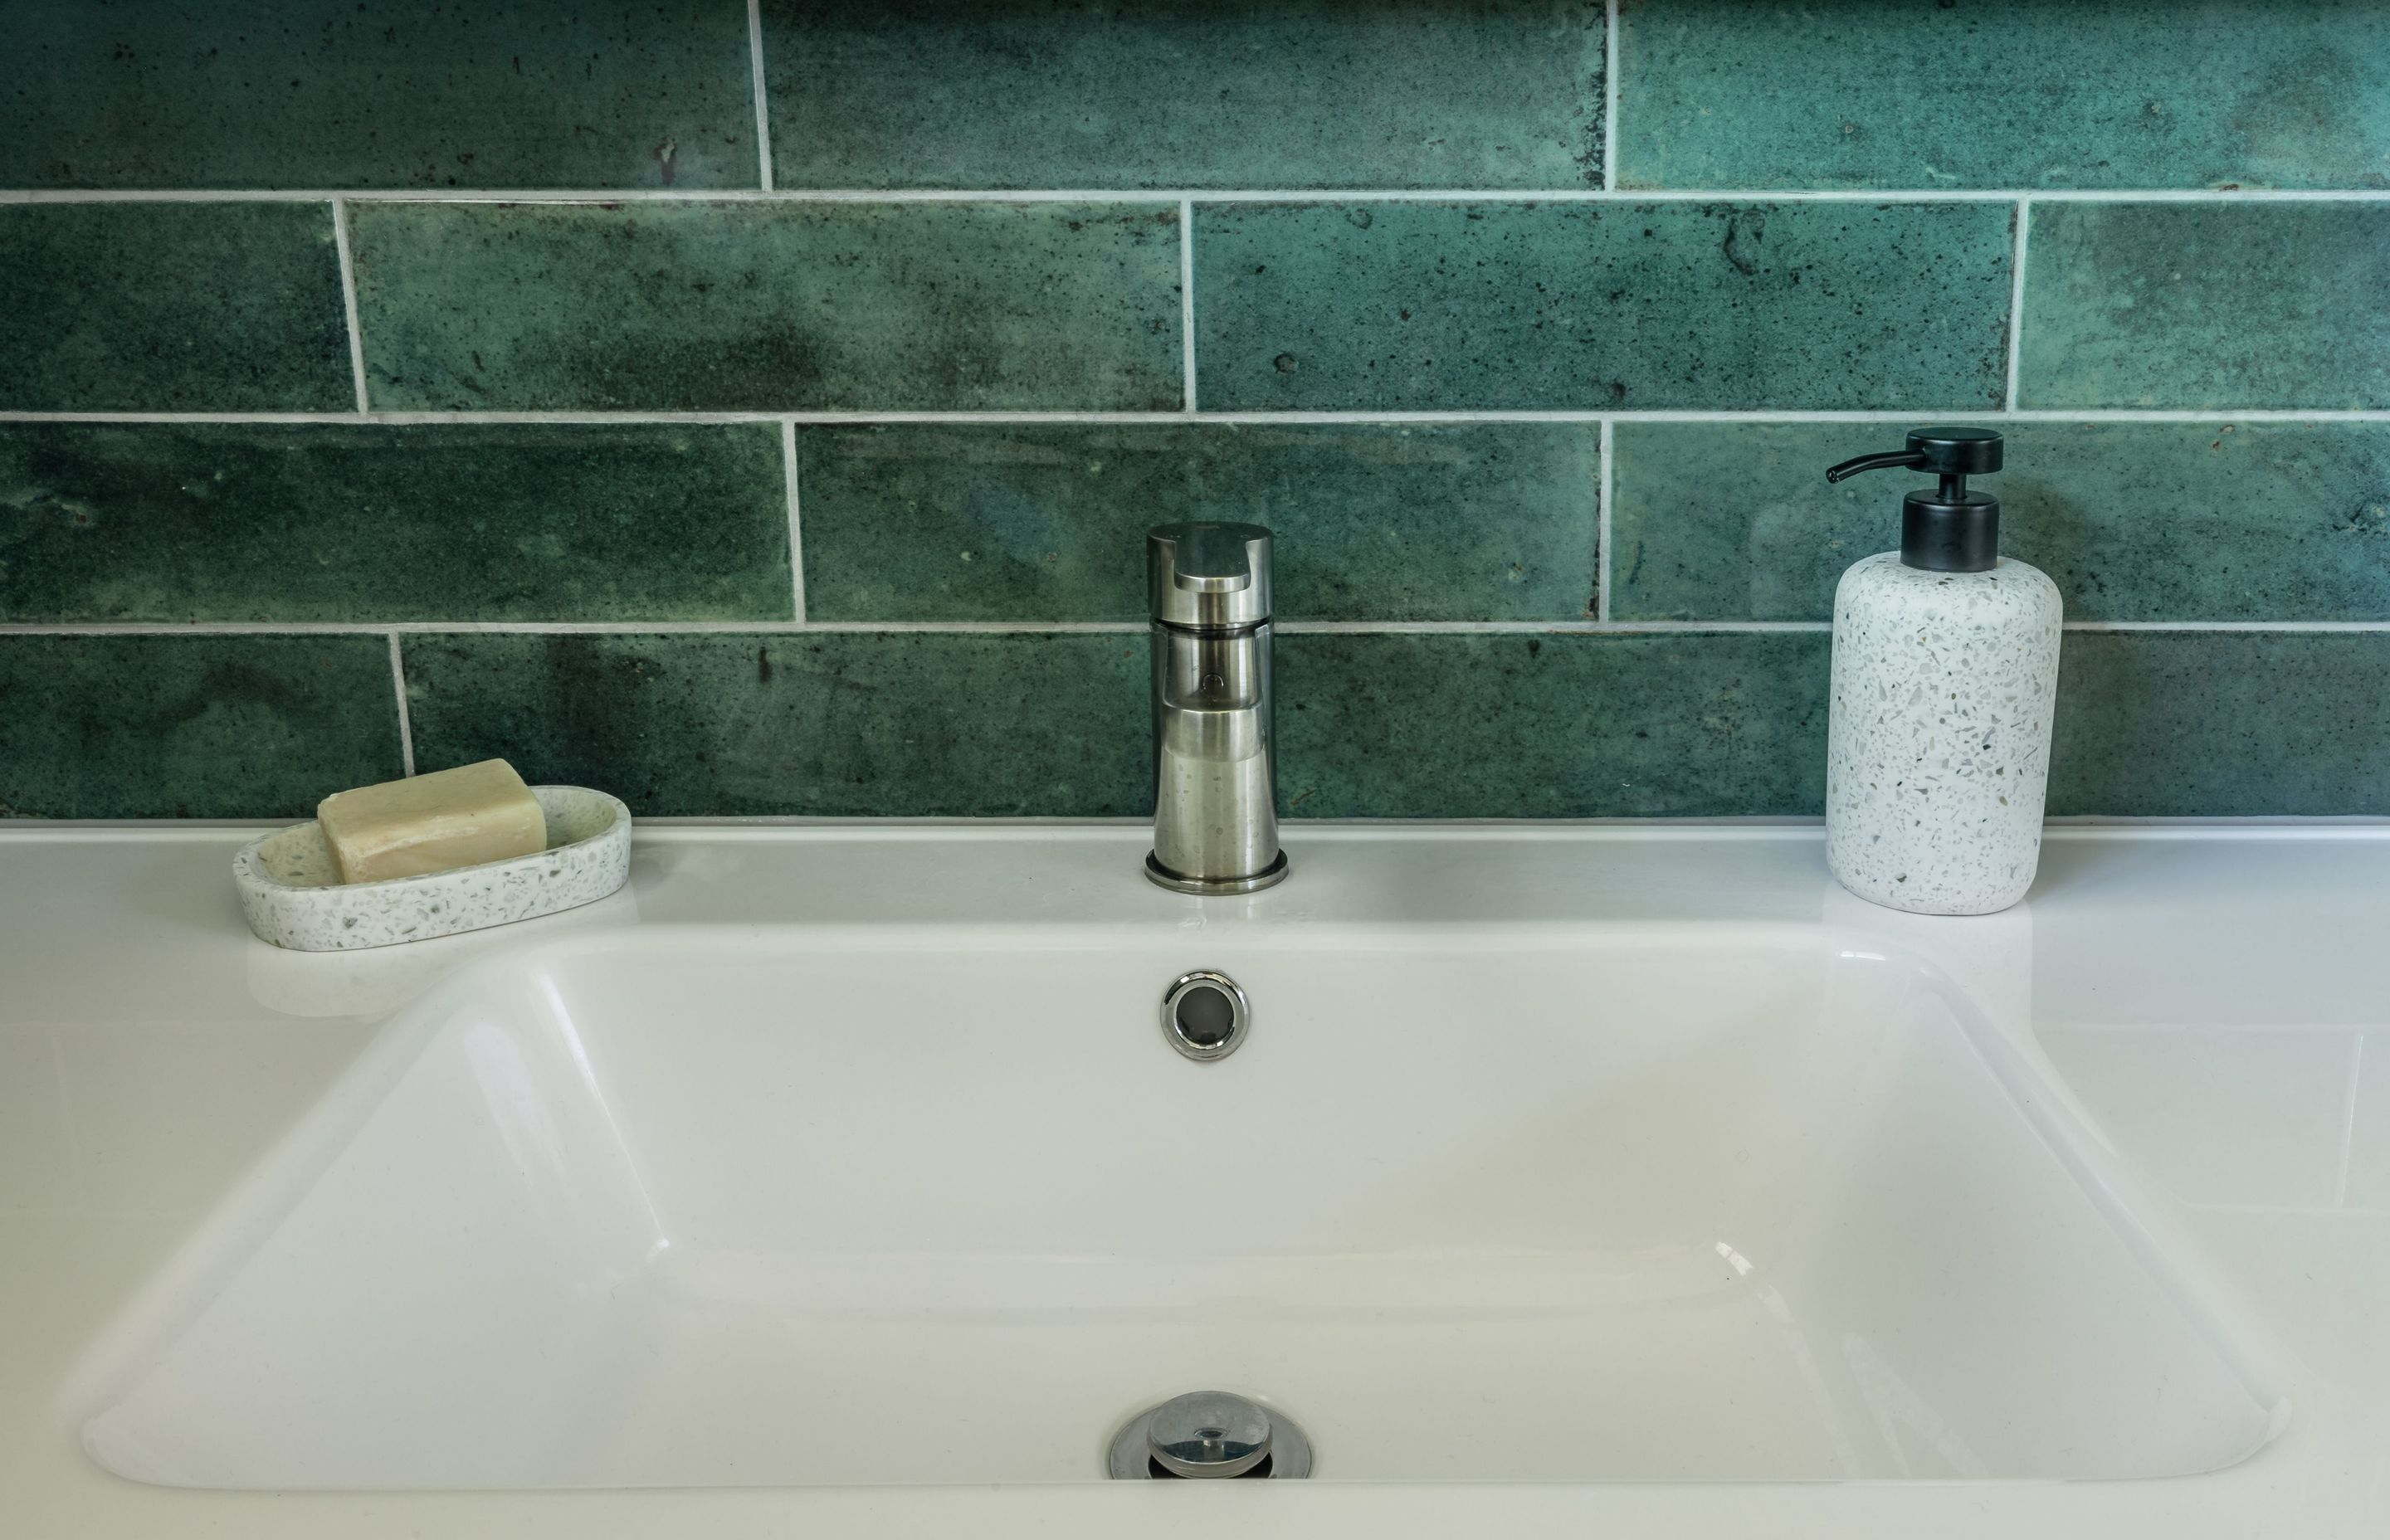 Transforming an Outdated Bathroom into a Relaxing and Luxurious Space